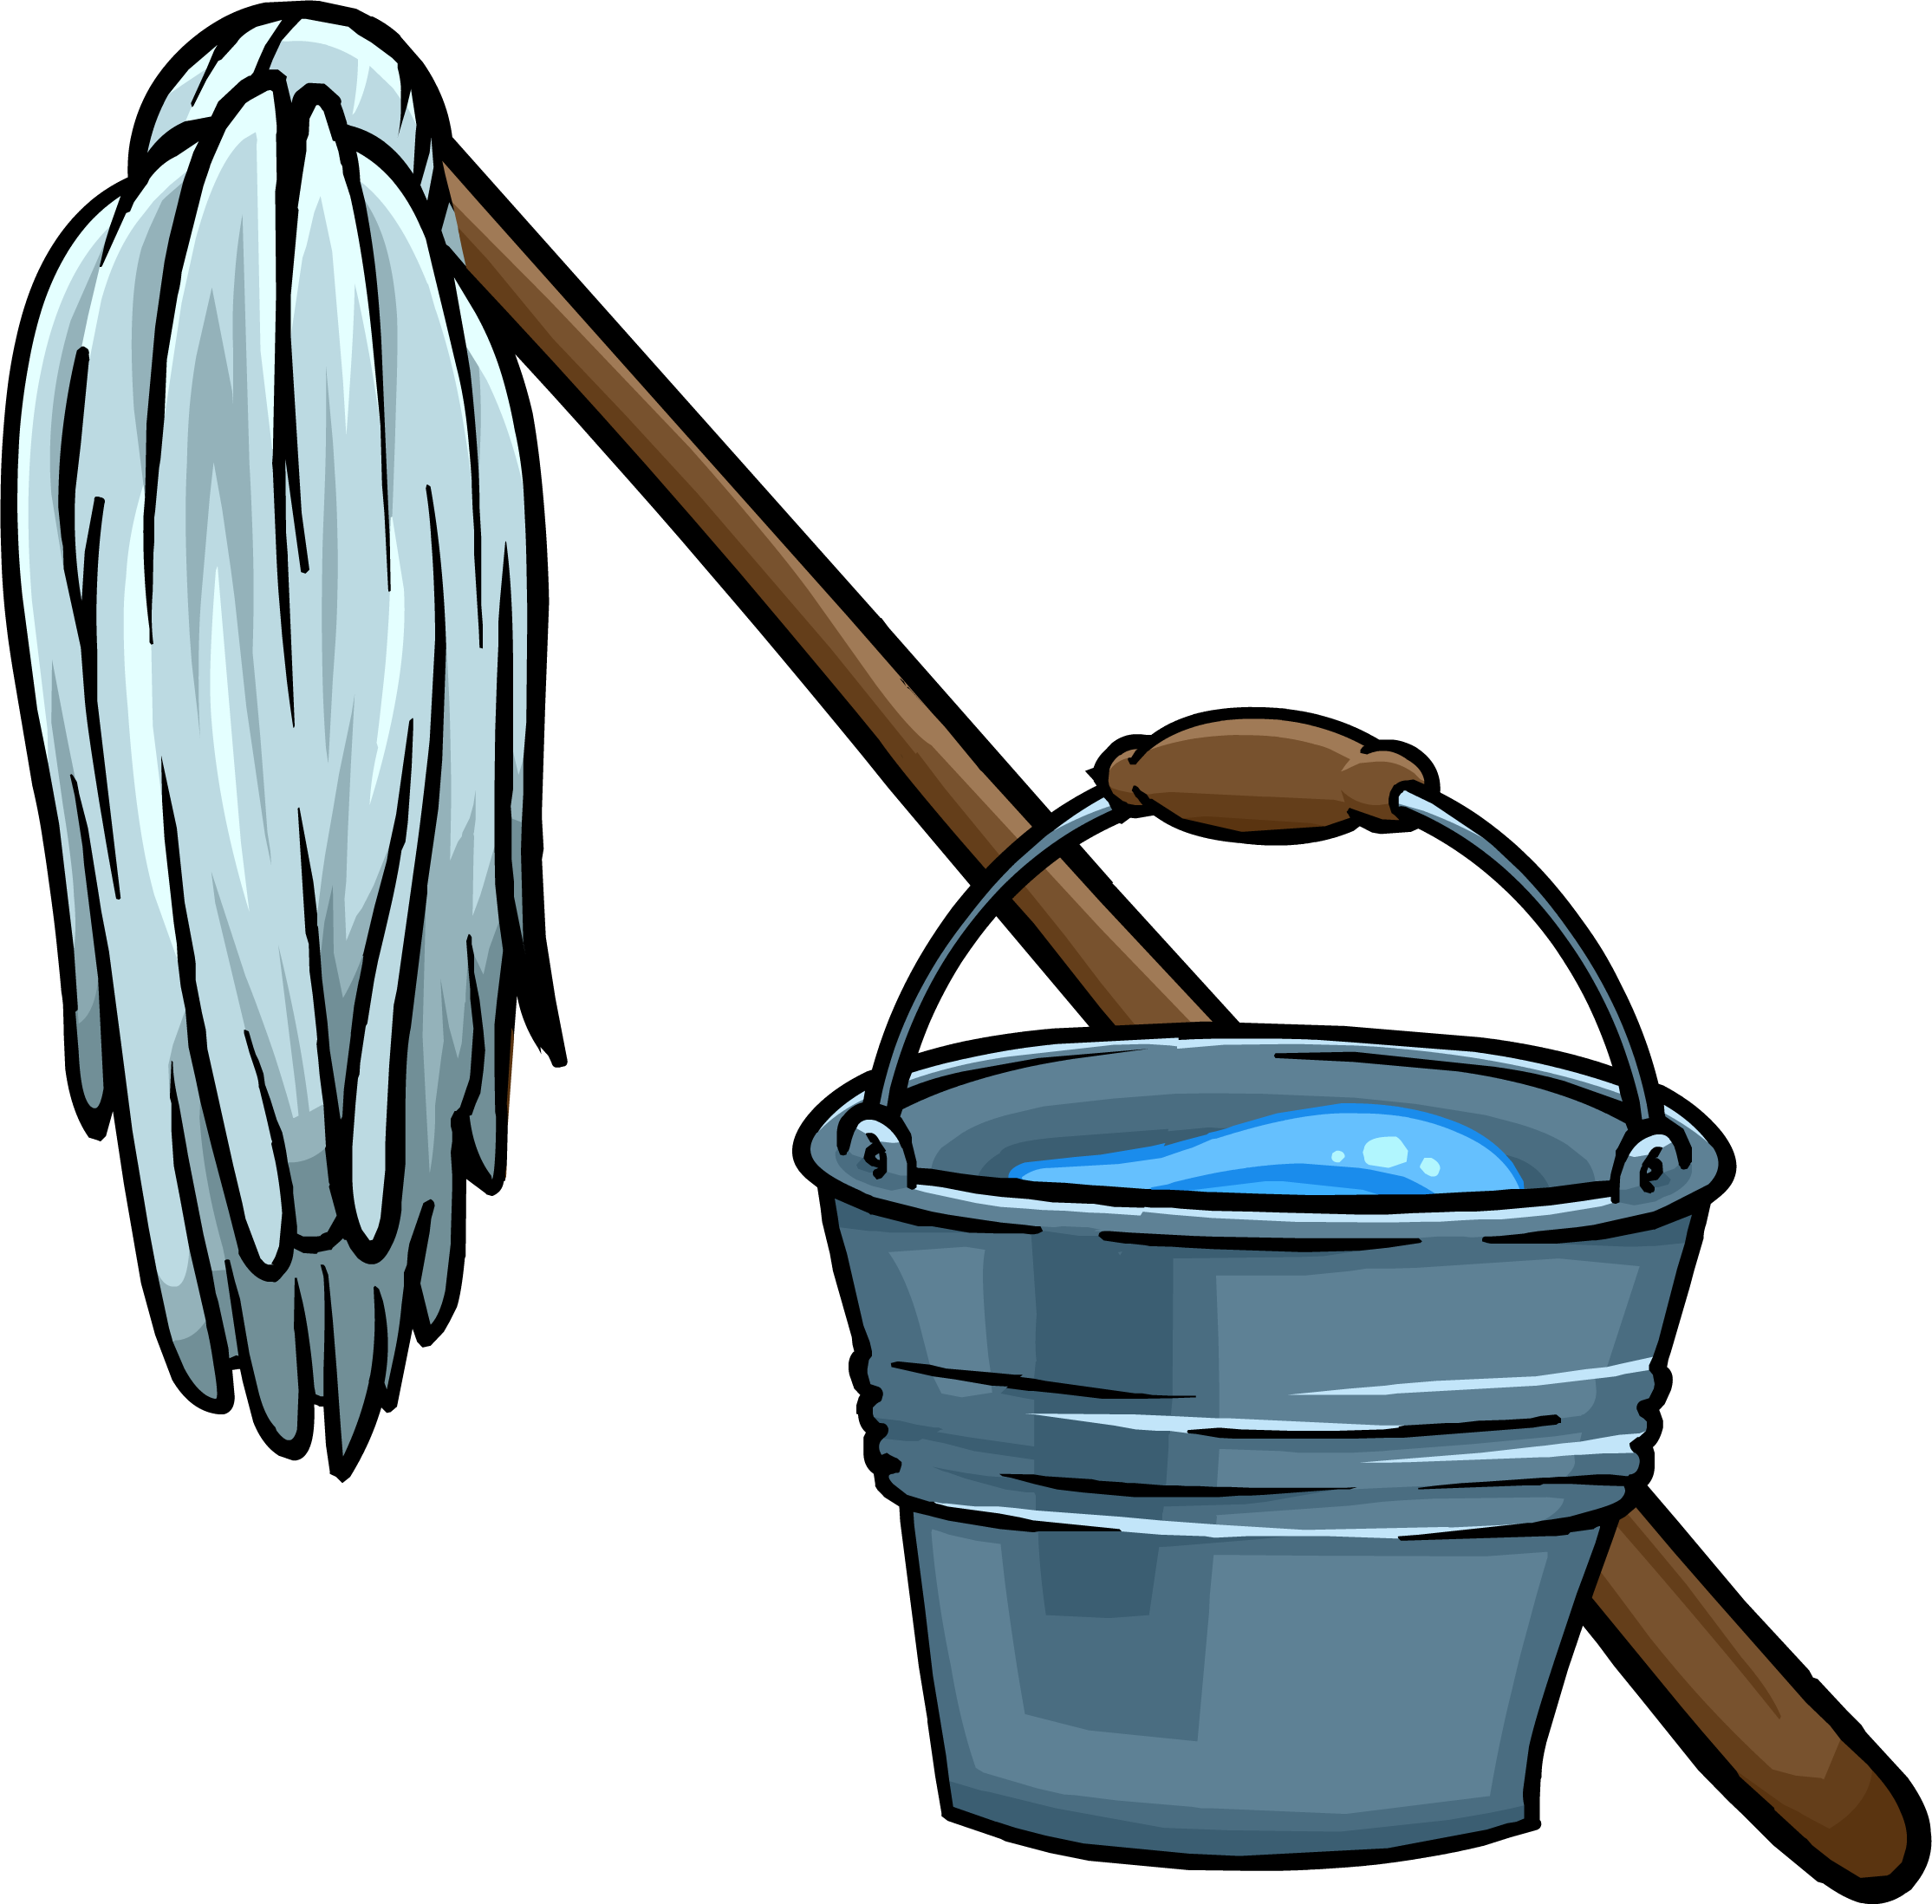 A Mop And Bucket With Water